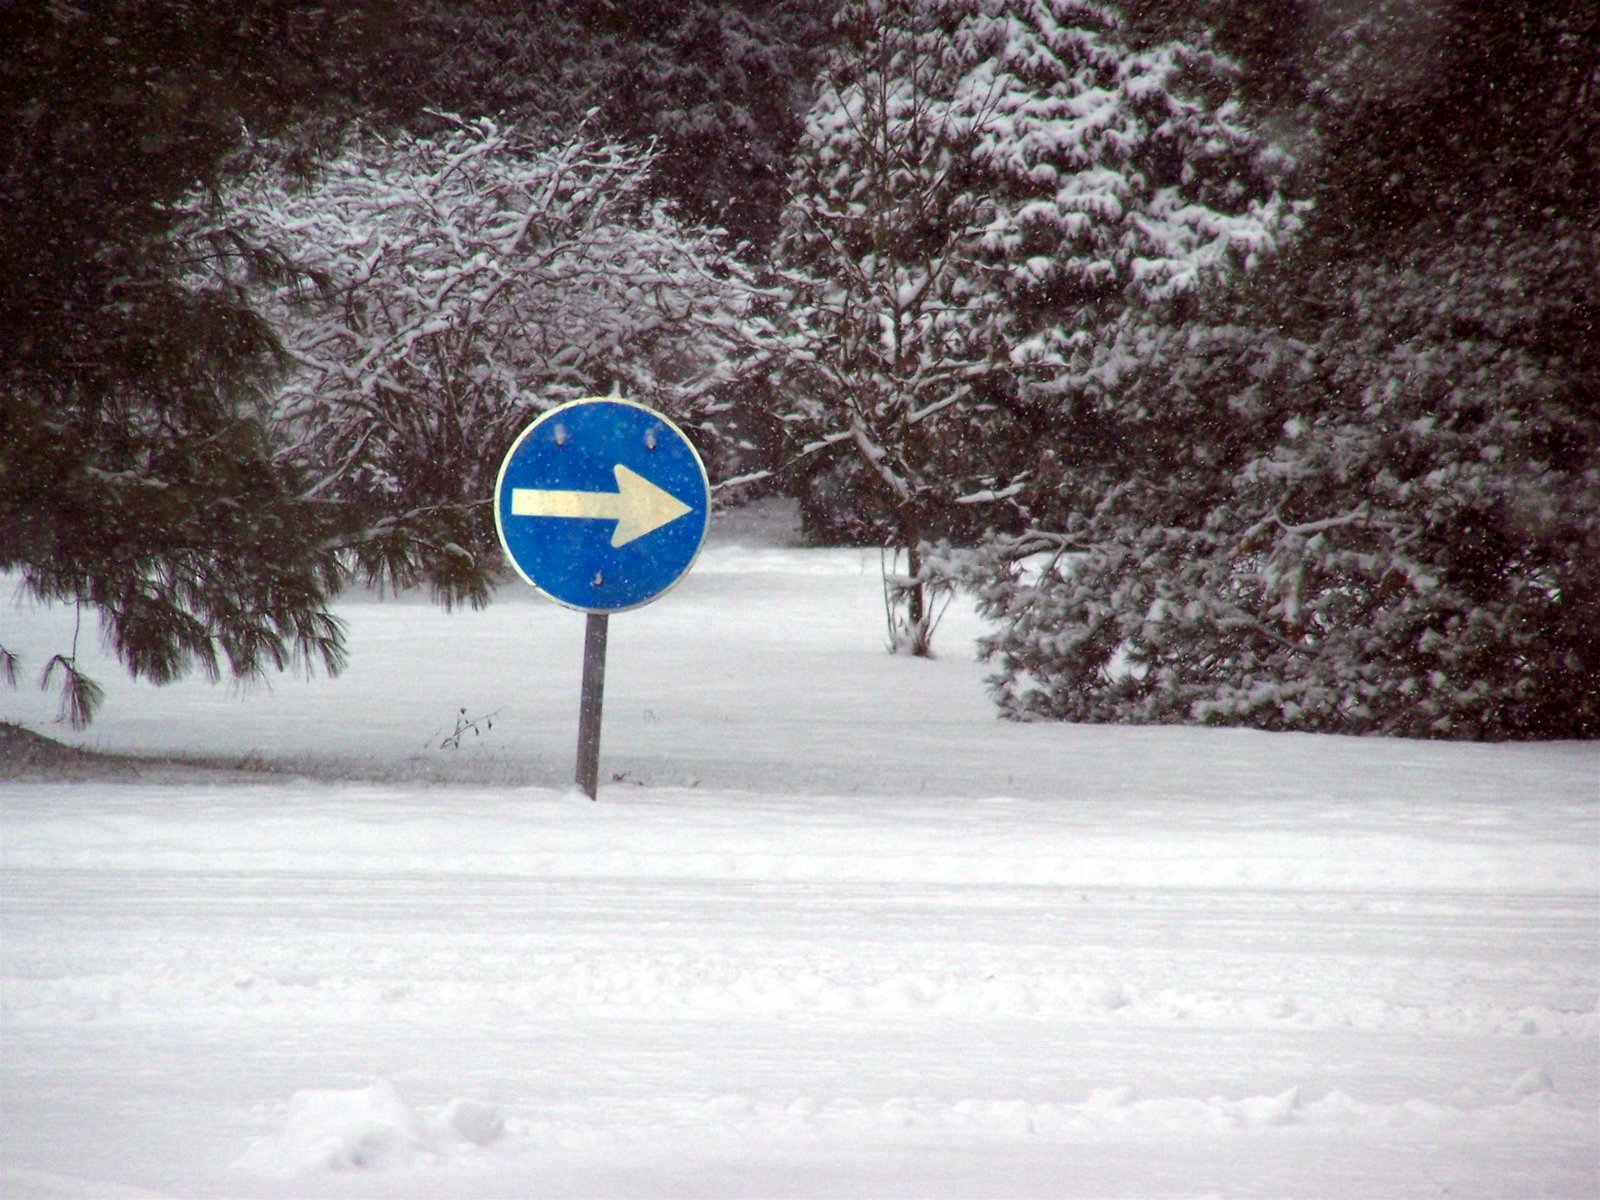 an arrow street sign is in the snow by some trees